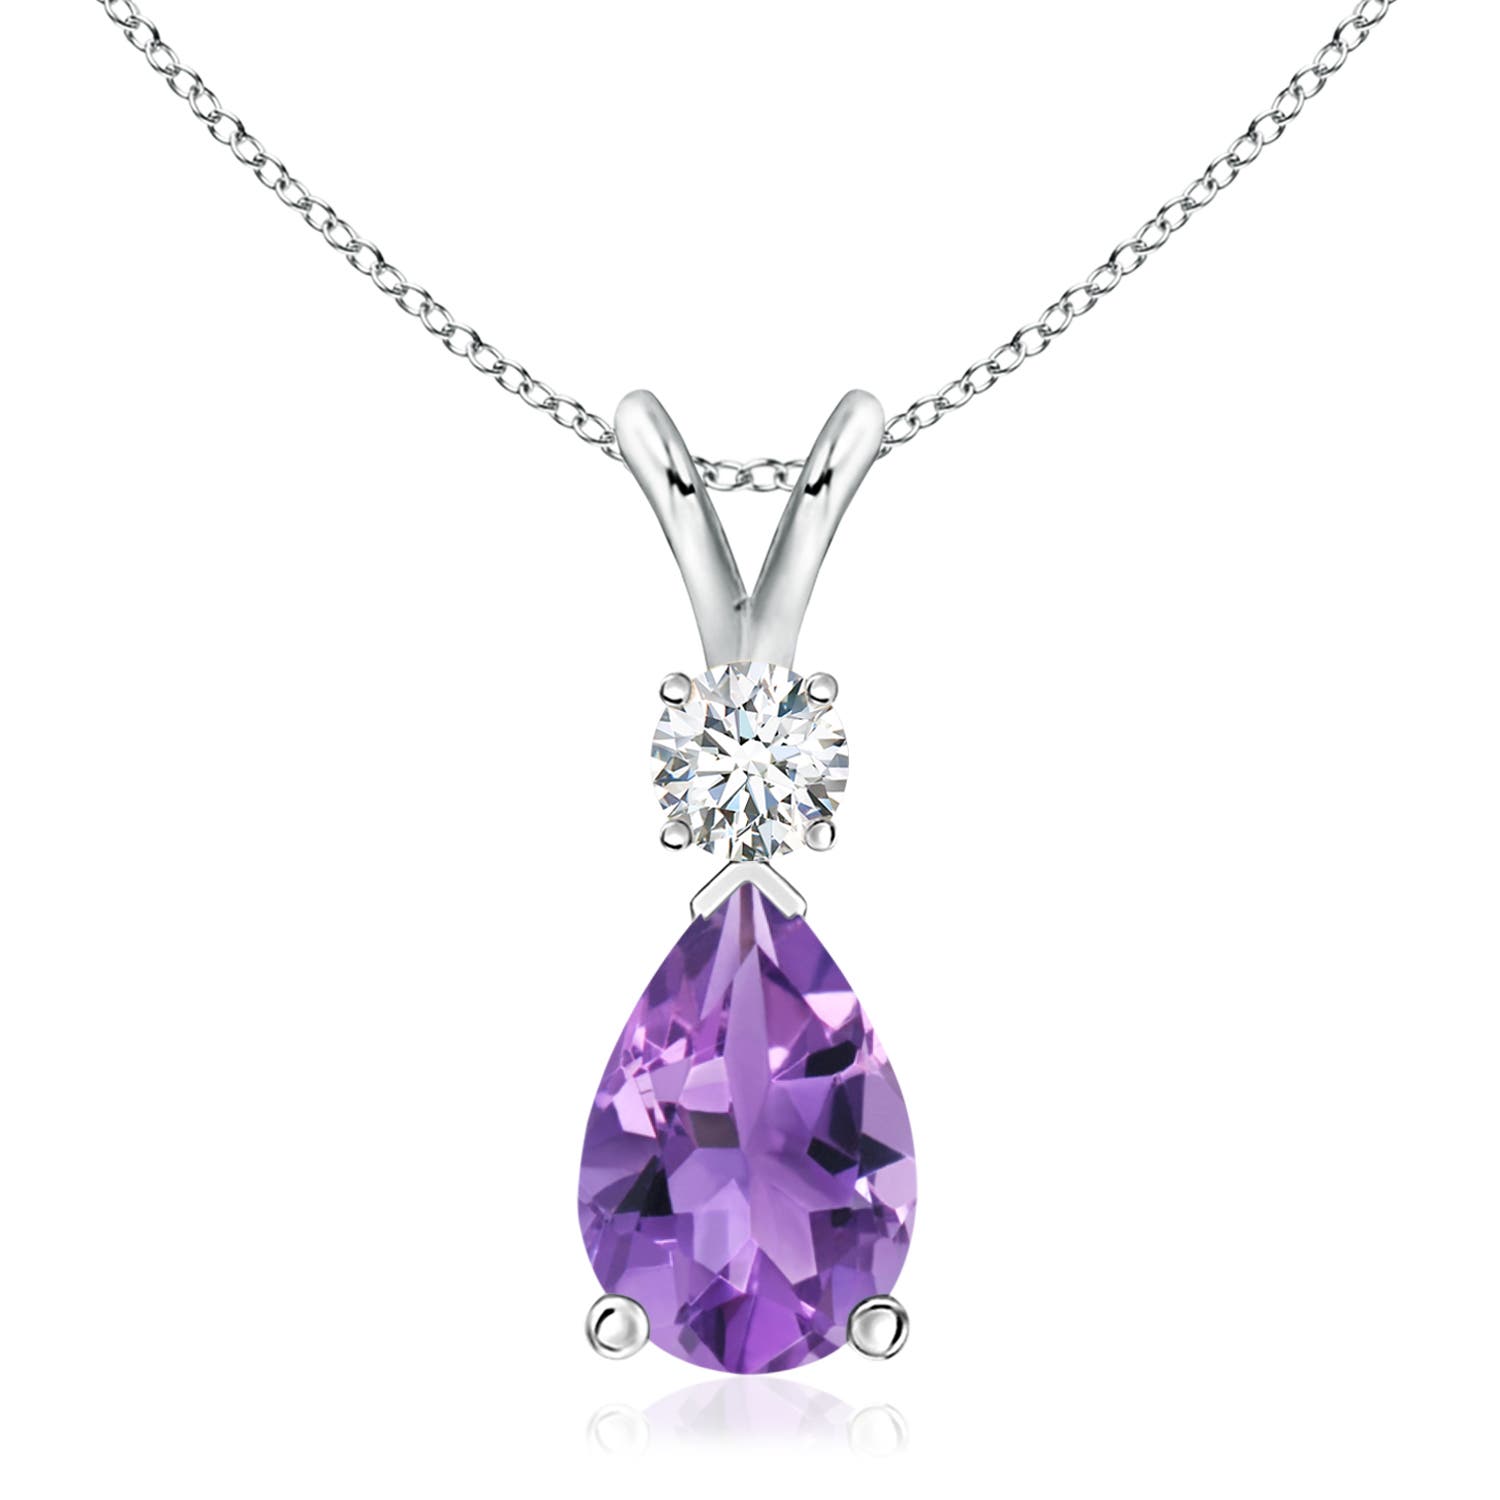 AA - Amethyst / 2.78 CT / 14 KT White Gold